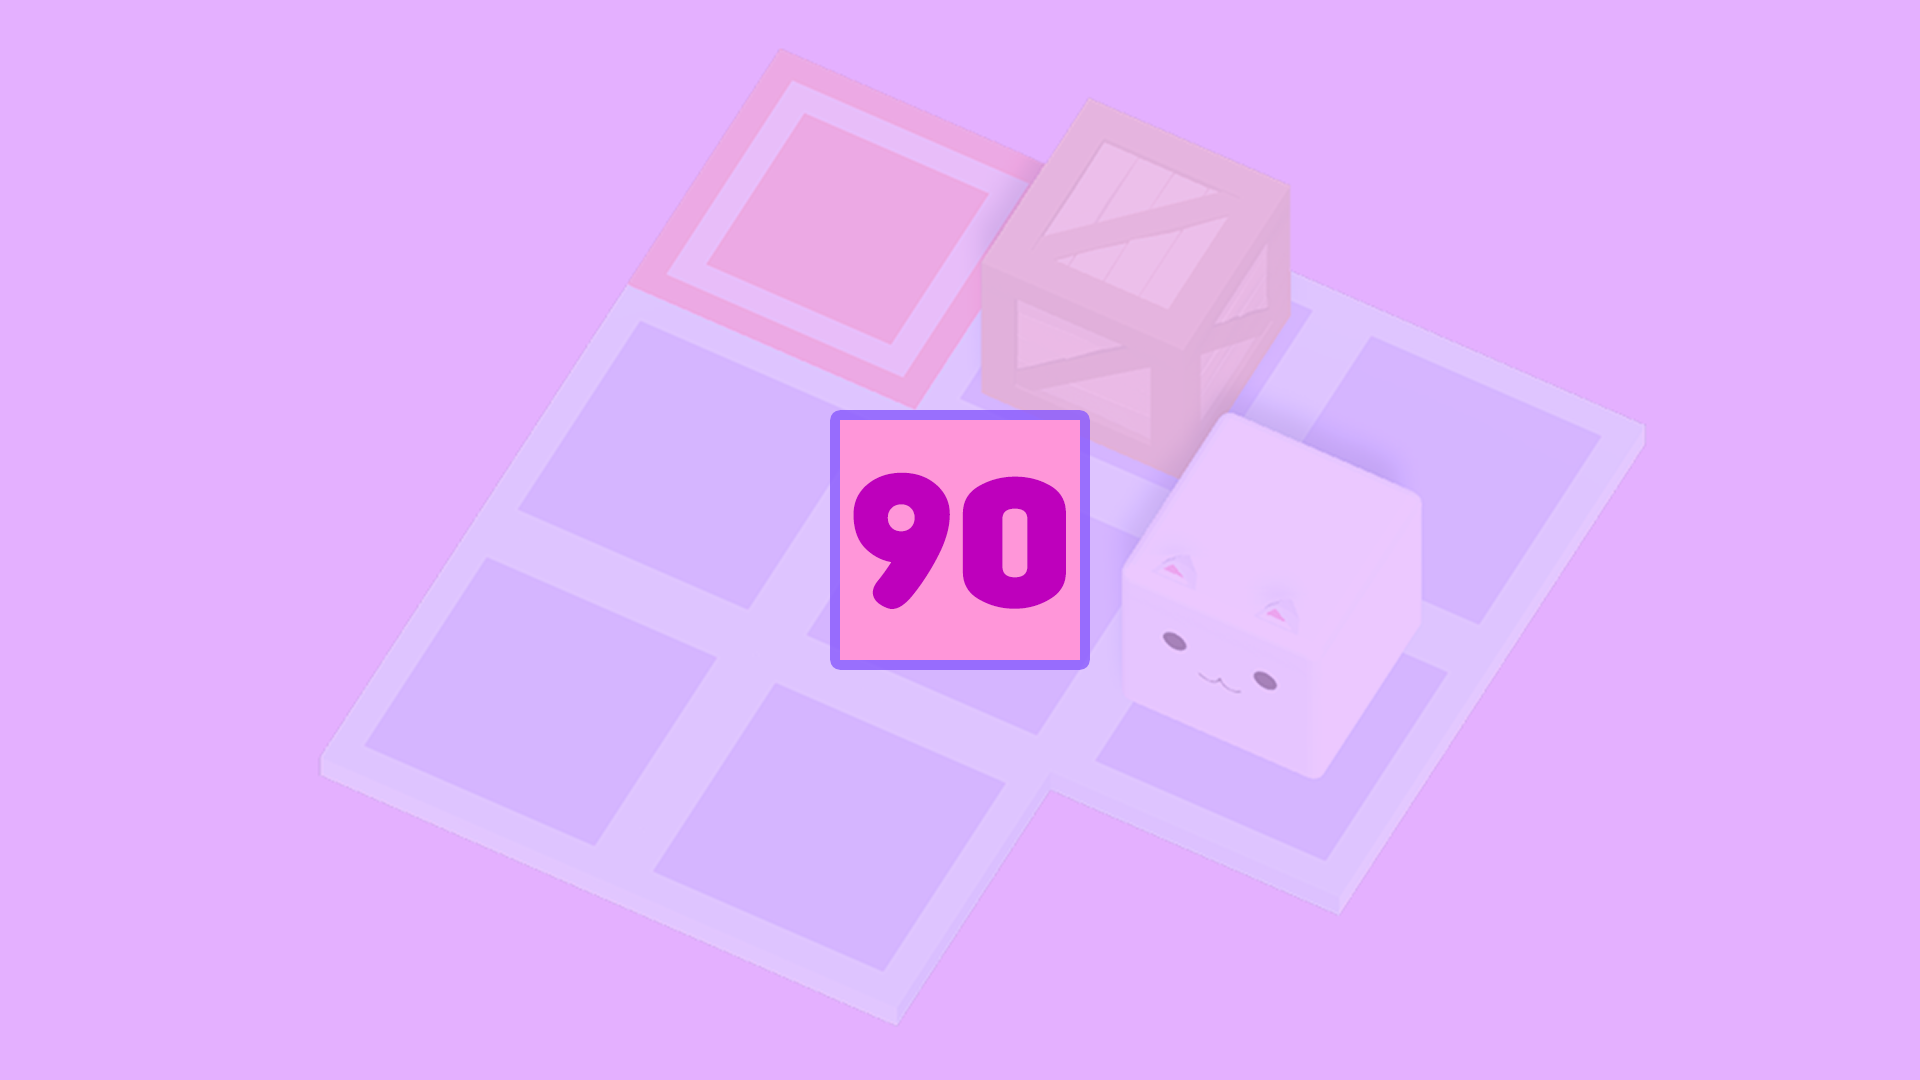 Icon for Level 90